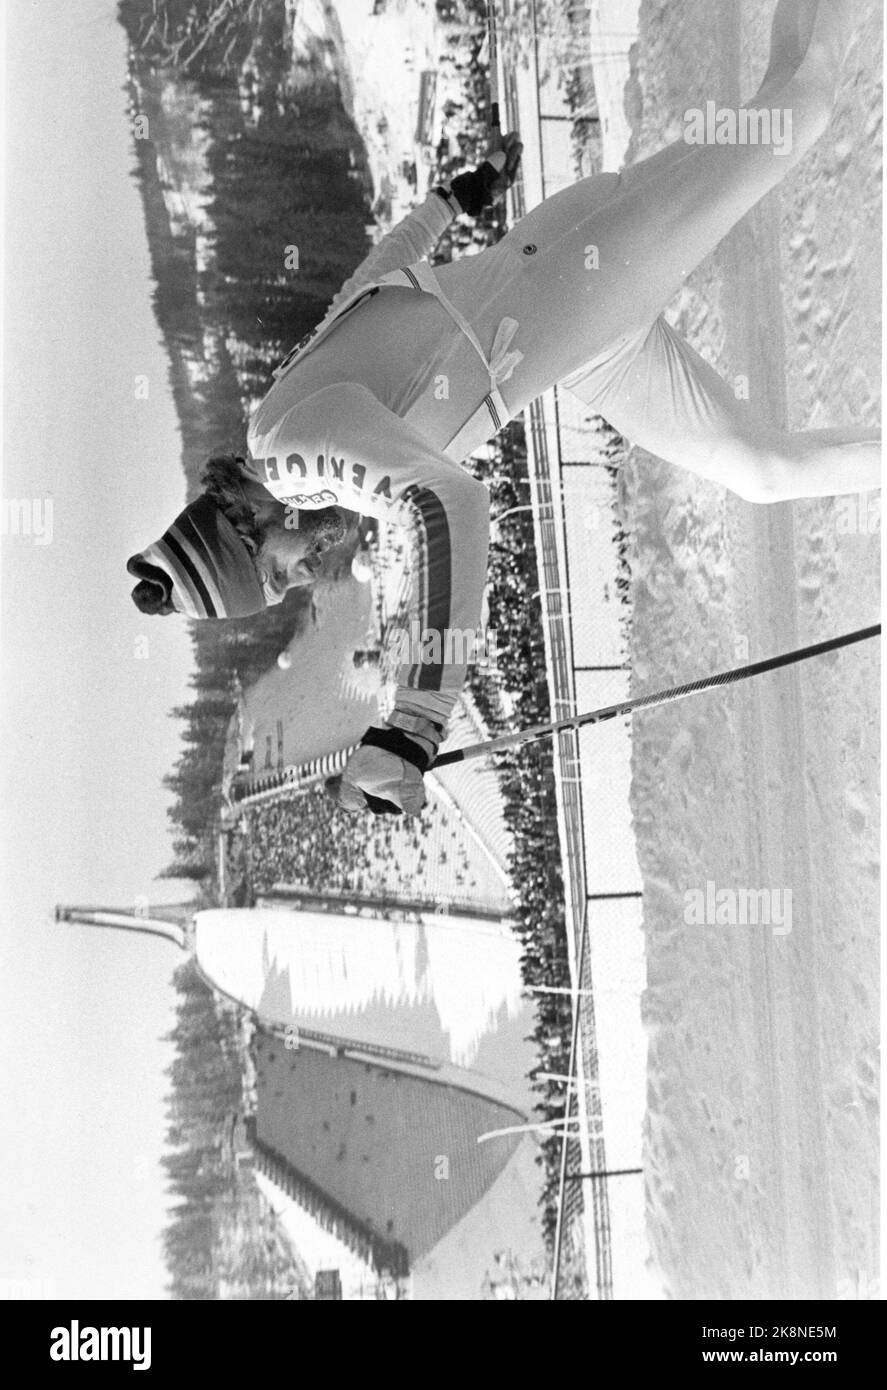 Oslo 1982-02: Ski World Cup 1982 Oslo. Thomas Wassberg (Sve), here from the Ski World Cup 1982. Holmenkollen jump hill in the background. Ntb archive / ntb Stock Photo